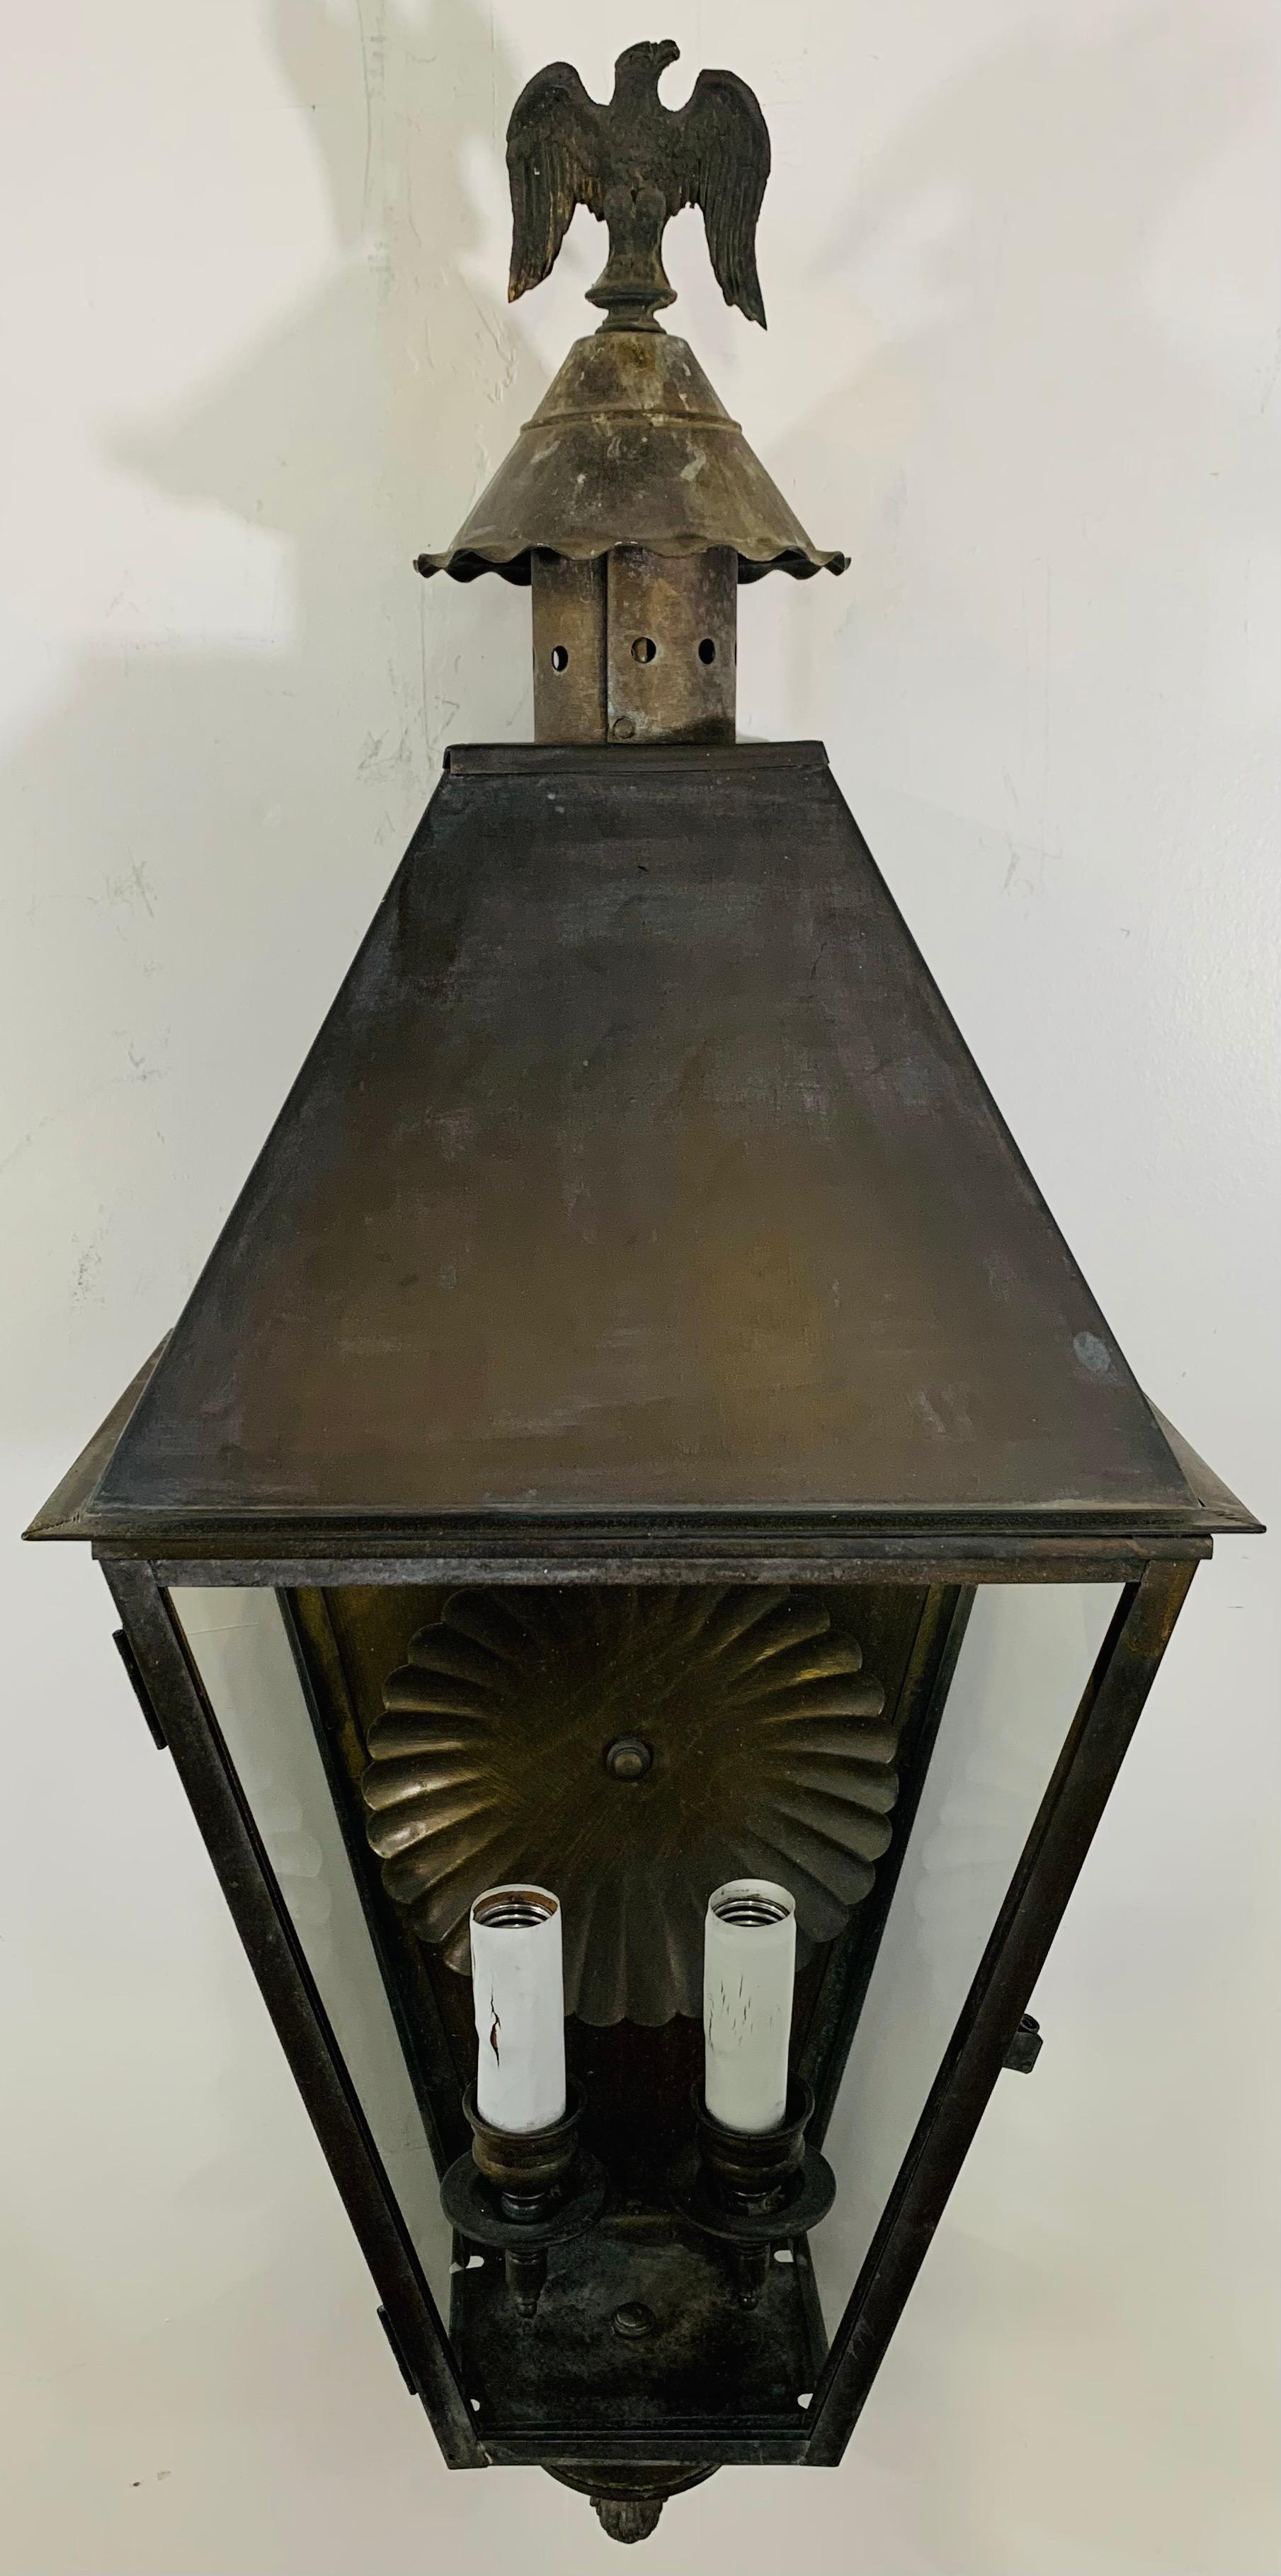 A pair of 1970's Georgian art lighting of lawrenceville, GA and Underwriters Laboratories Inc indoor or outdoor wall lanterns or sconces. Each having two candelabras. The sconces or lanterns features an Eagle design on the top and round handcrafted